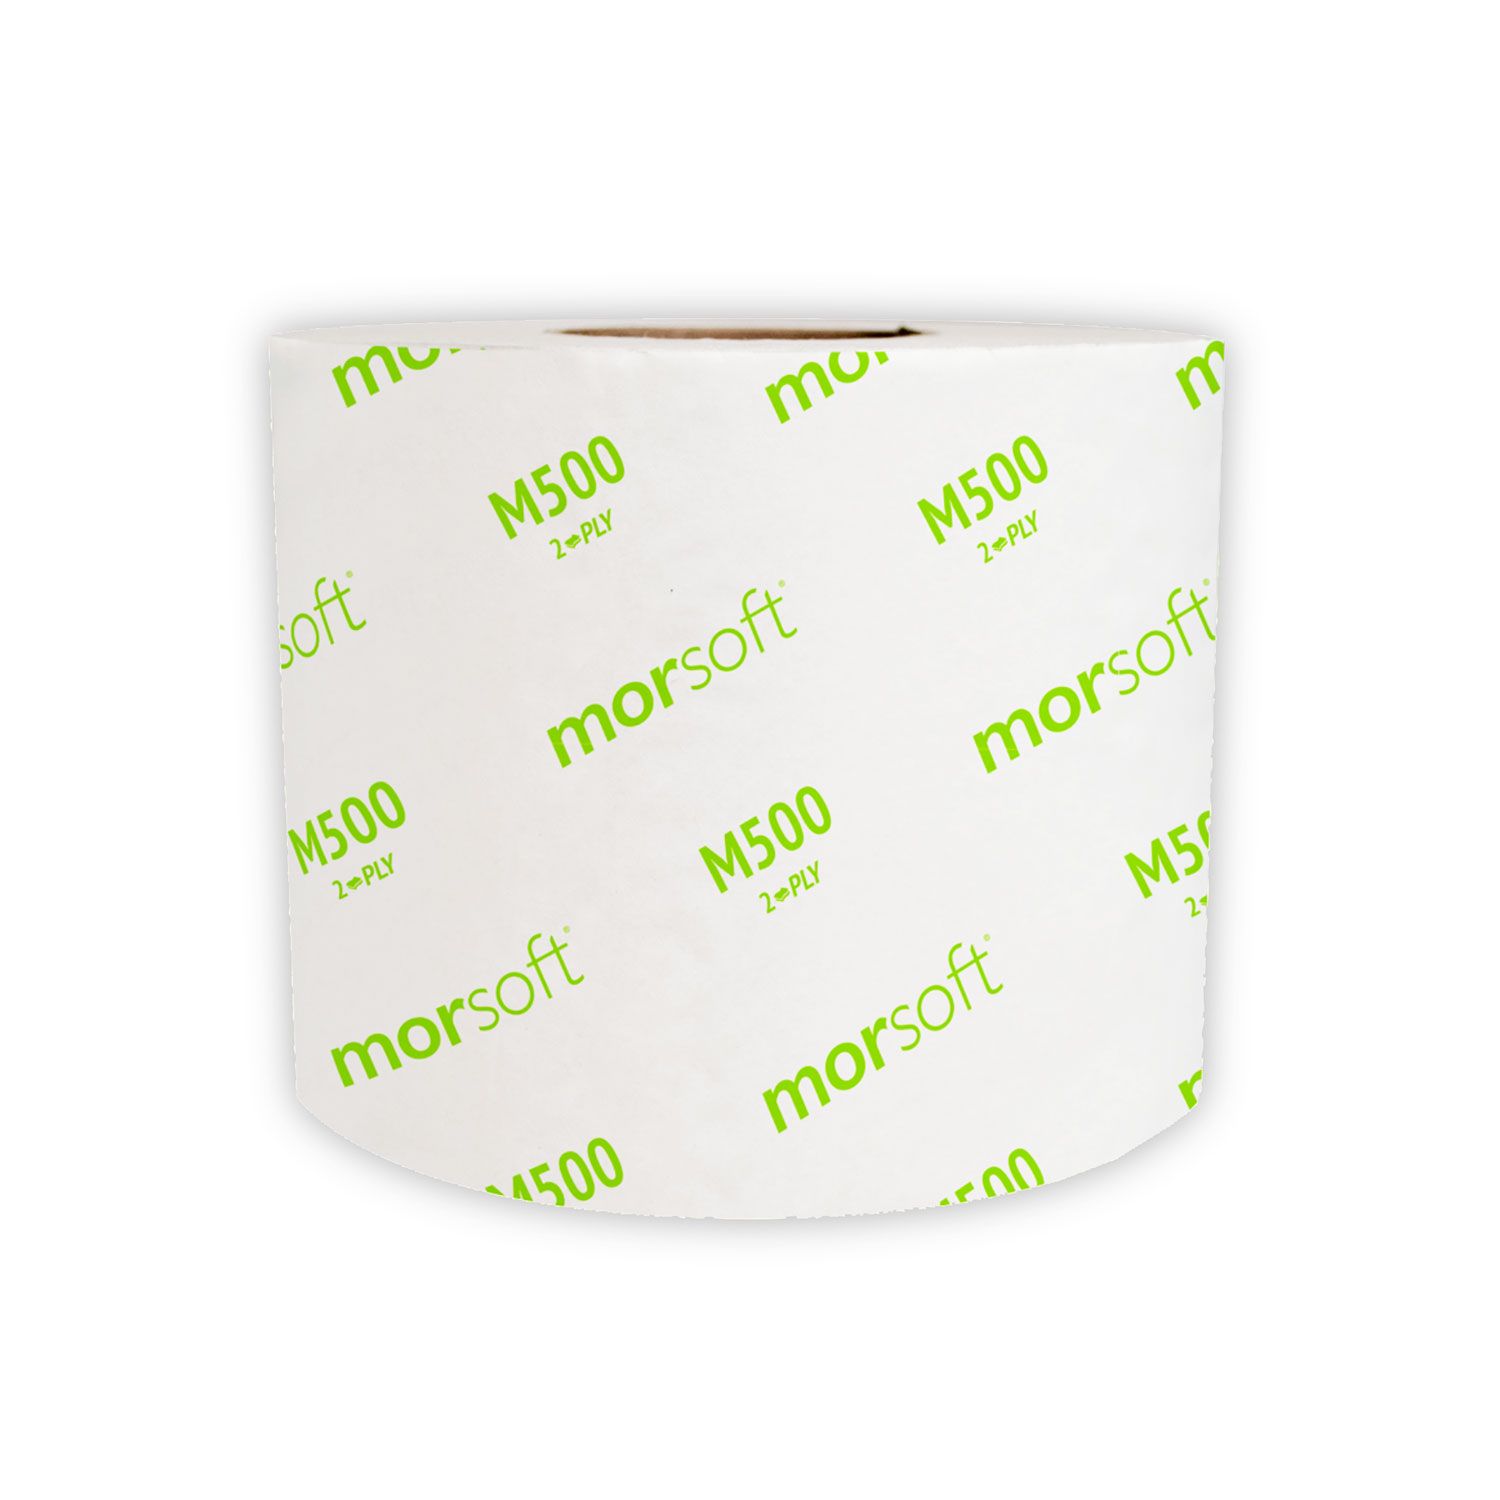 Morcon Tissue Morsoft Controlled Bath Tissue, Septic Safe, 2-Ply, White ...